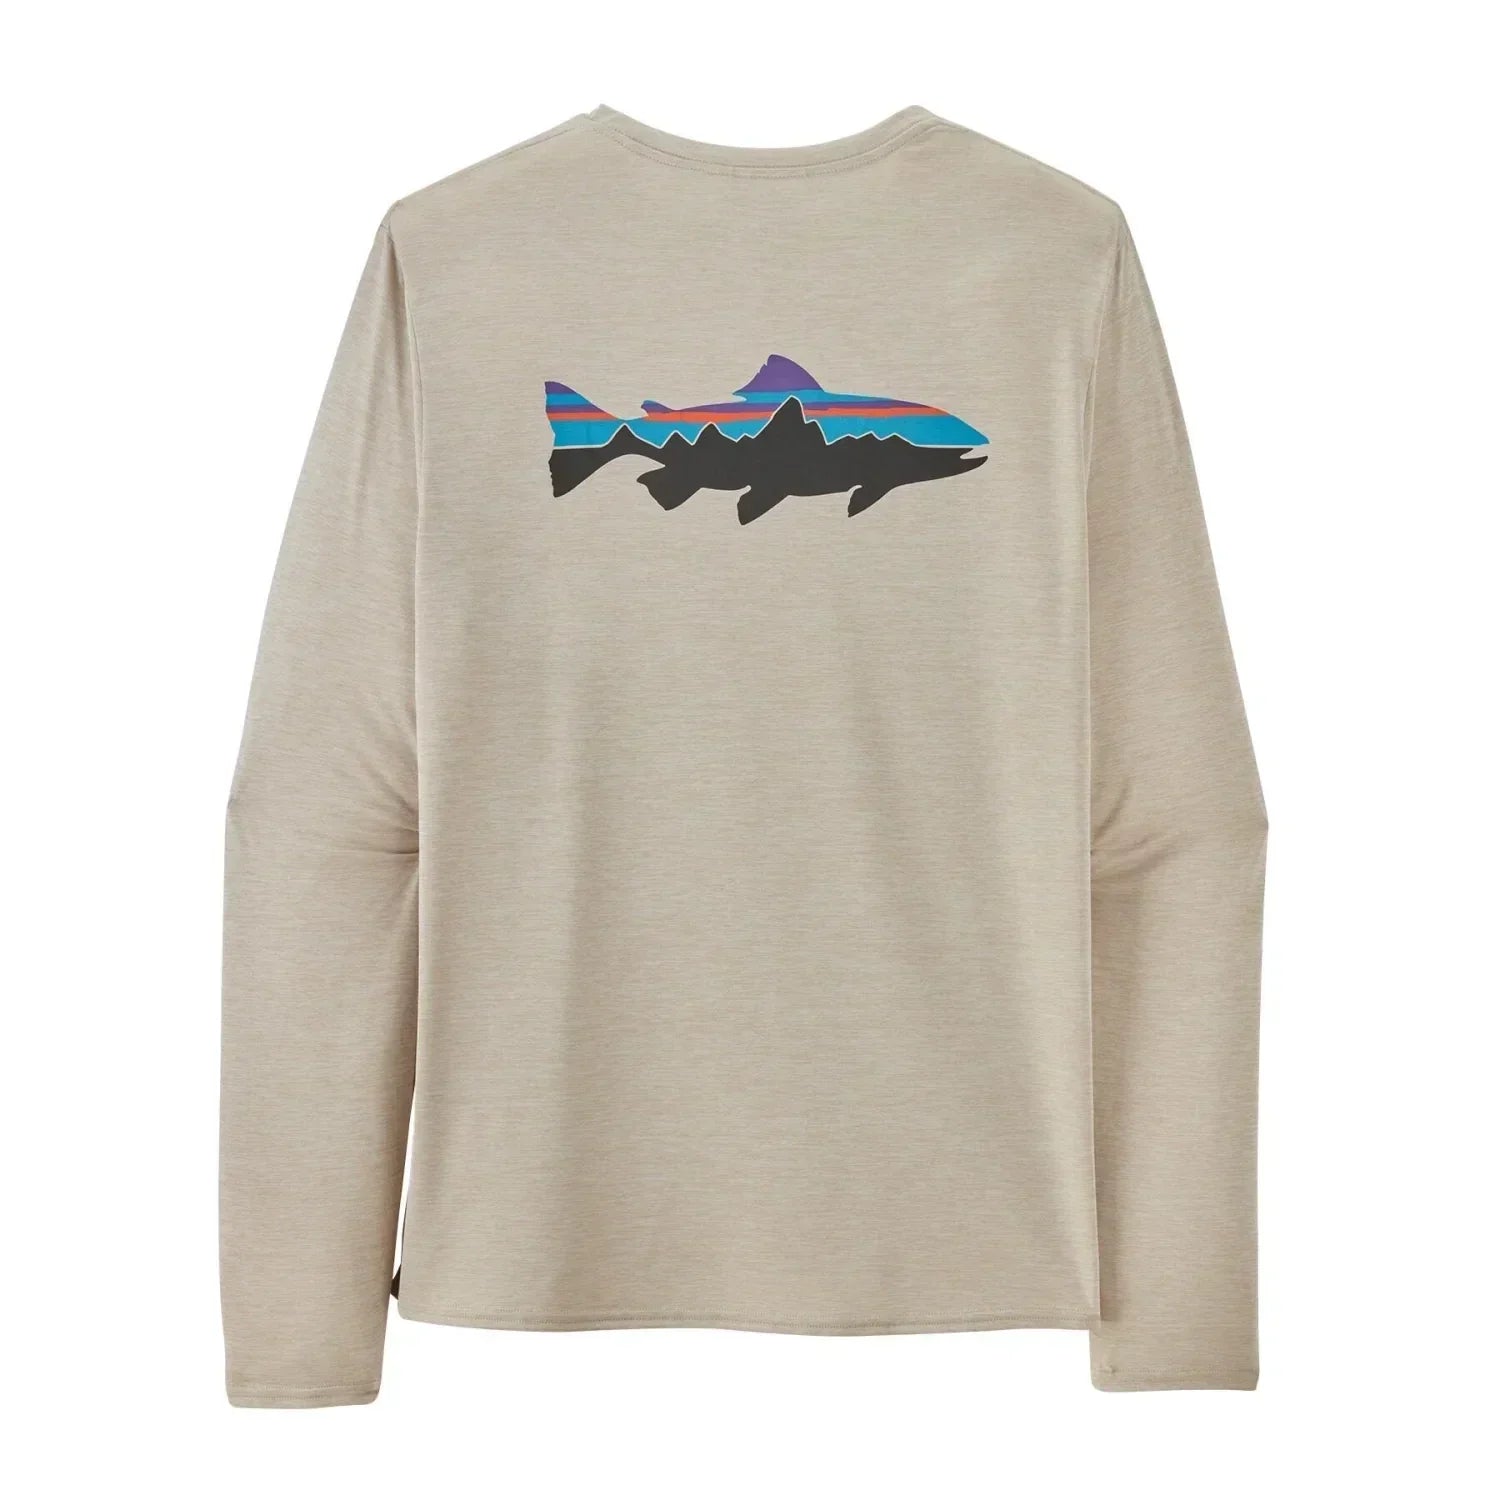 Patagonia 01. MENS APPAREL - MENS LS SHIRTS - MENS LS ACTIVE Men's Long Sleeve Capilene Cool Daily Graphic Shirt - Waters FPMX FITZ ROY TROUT|PUMICE X-DYE